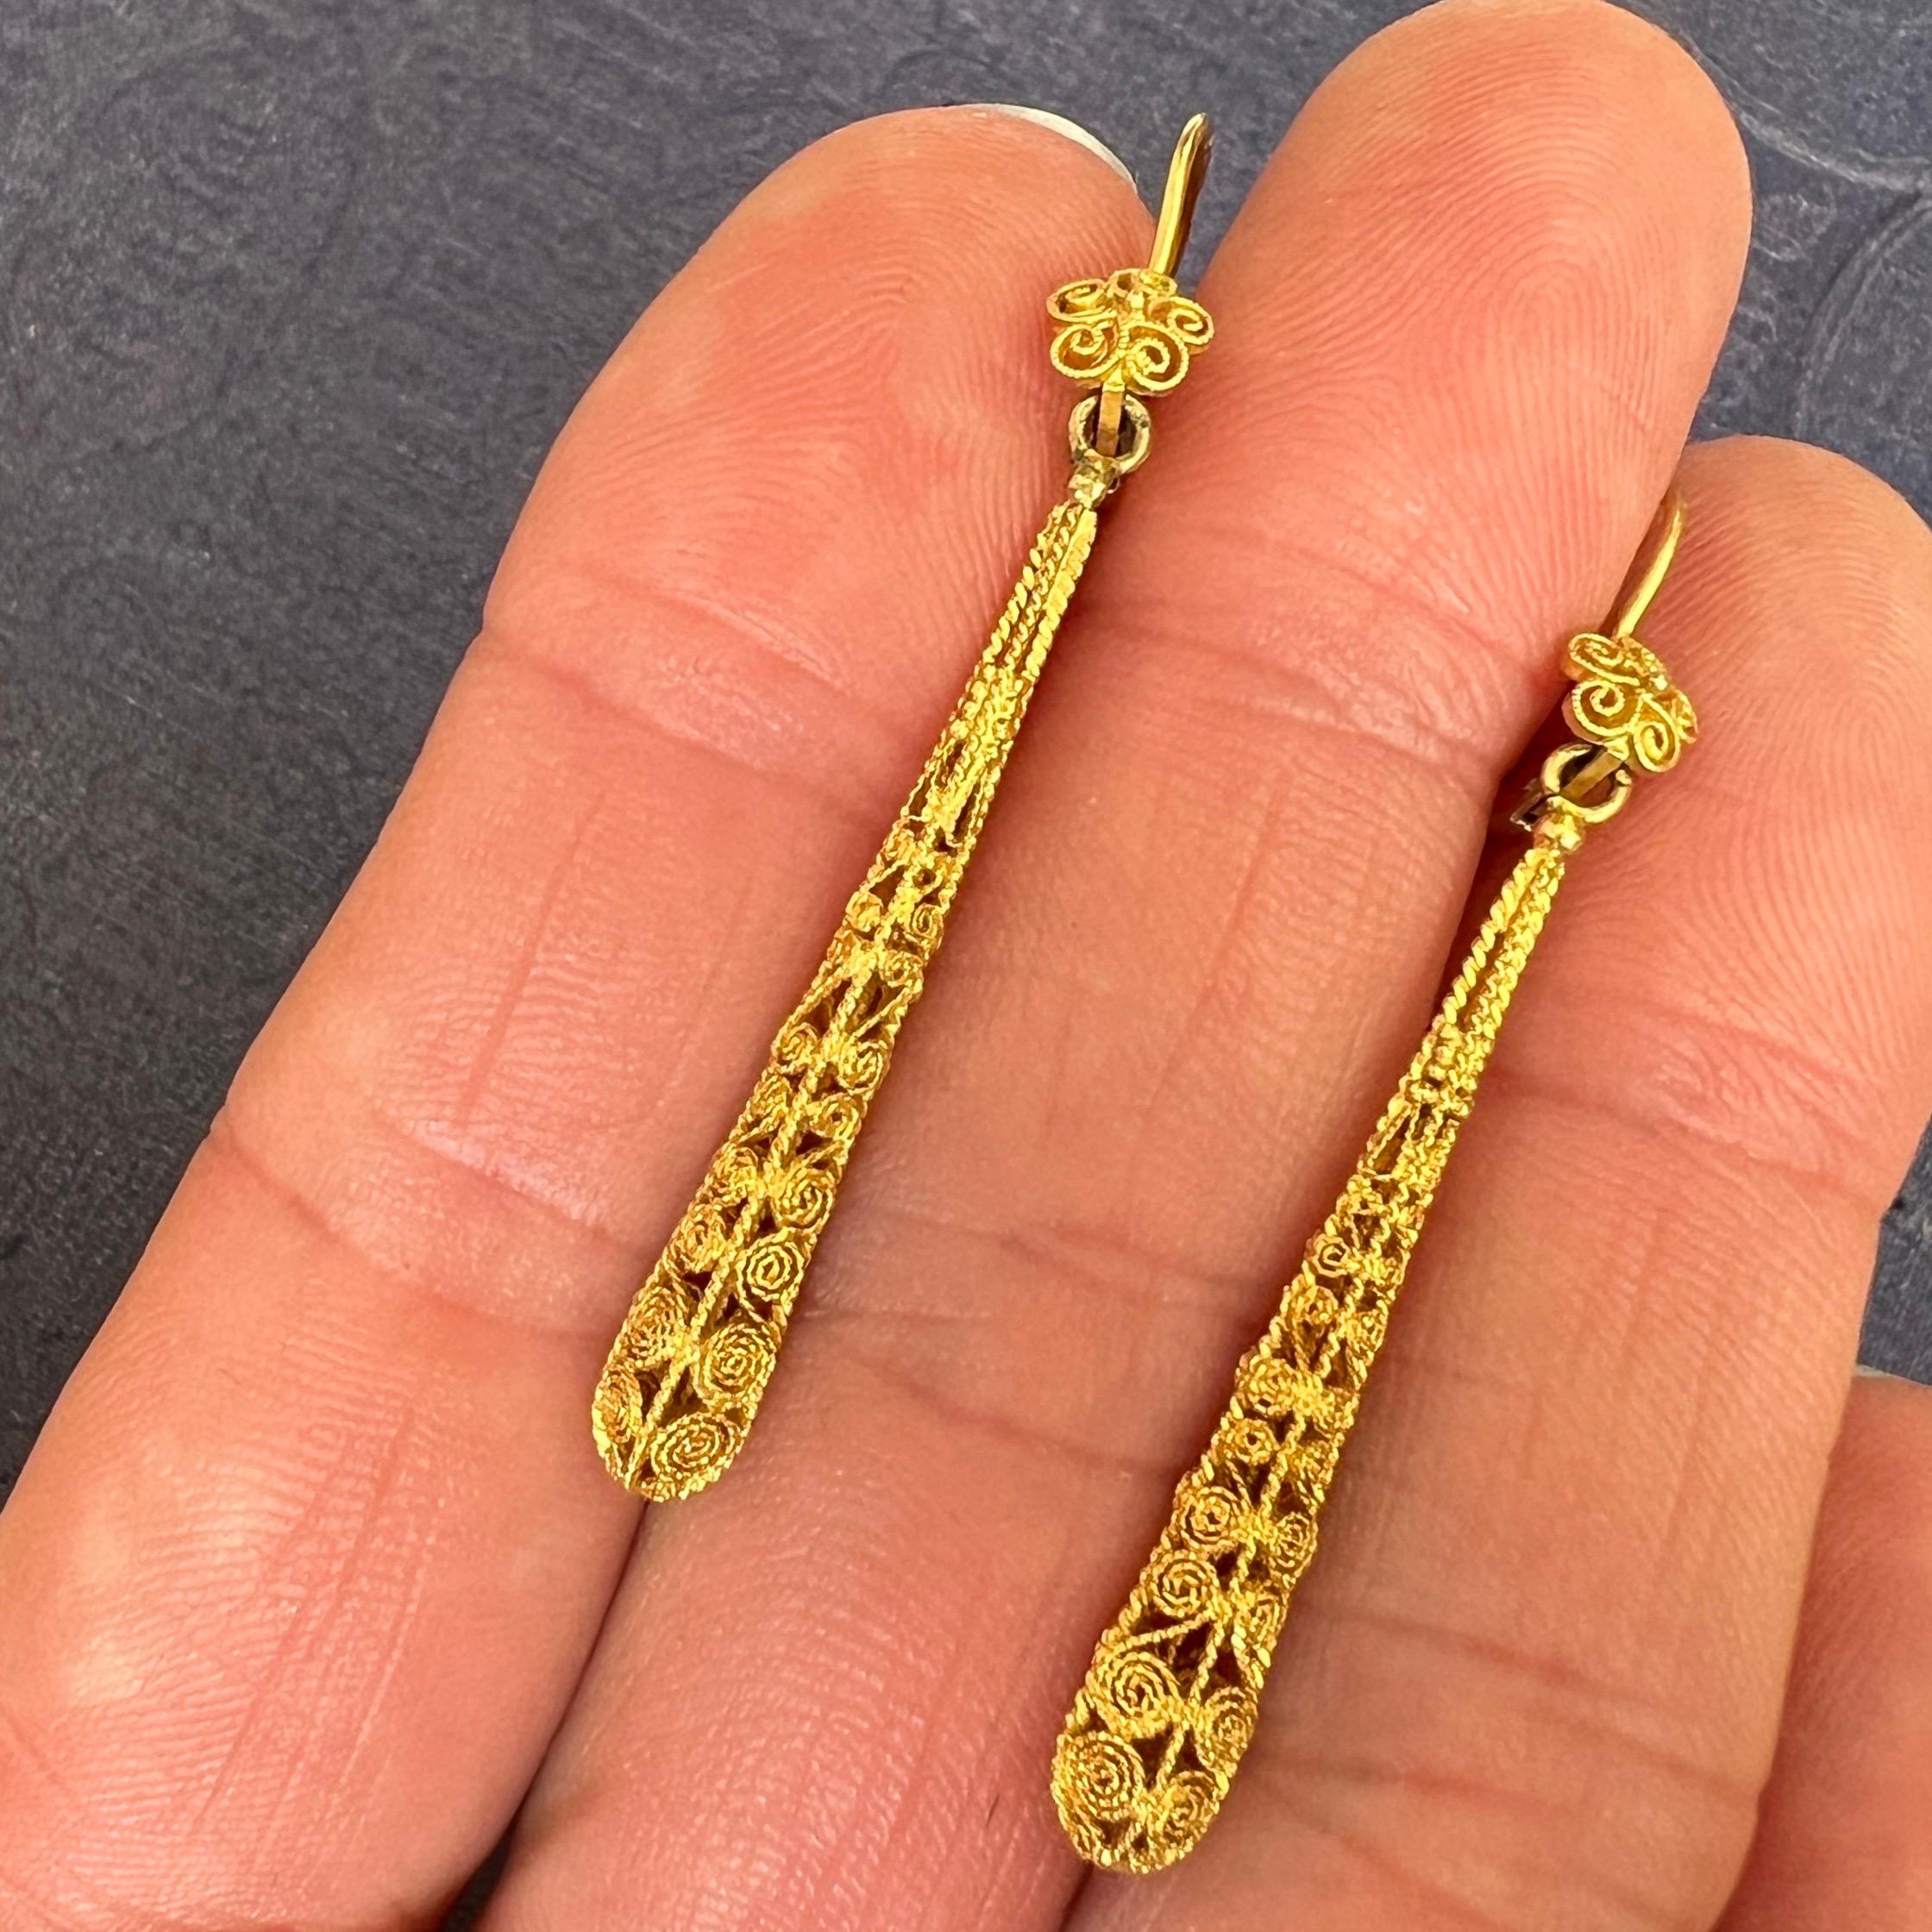 These Early 20th century 14 karat yellow gold dangle earrings are beautifully made of fine filigree. The filigree is delicately made of thin gold tread - woven and twisted to form this incredible texture and detailed earrings. On top - the earpiece